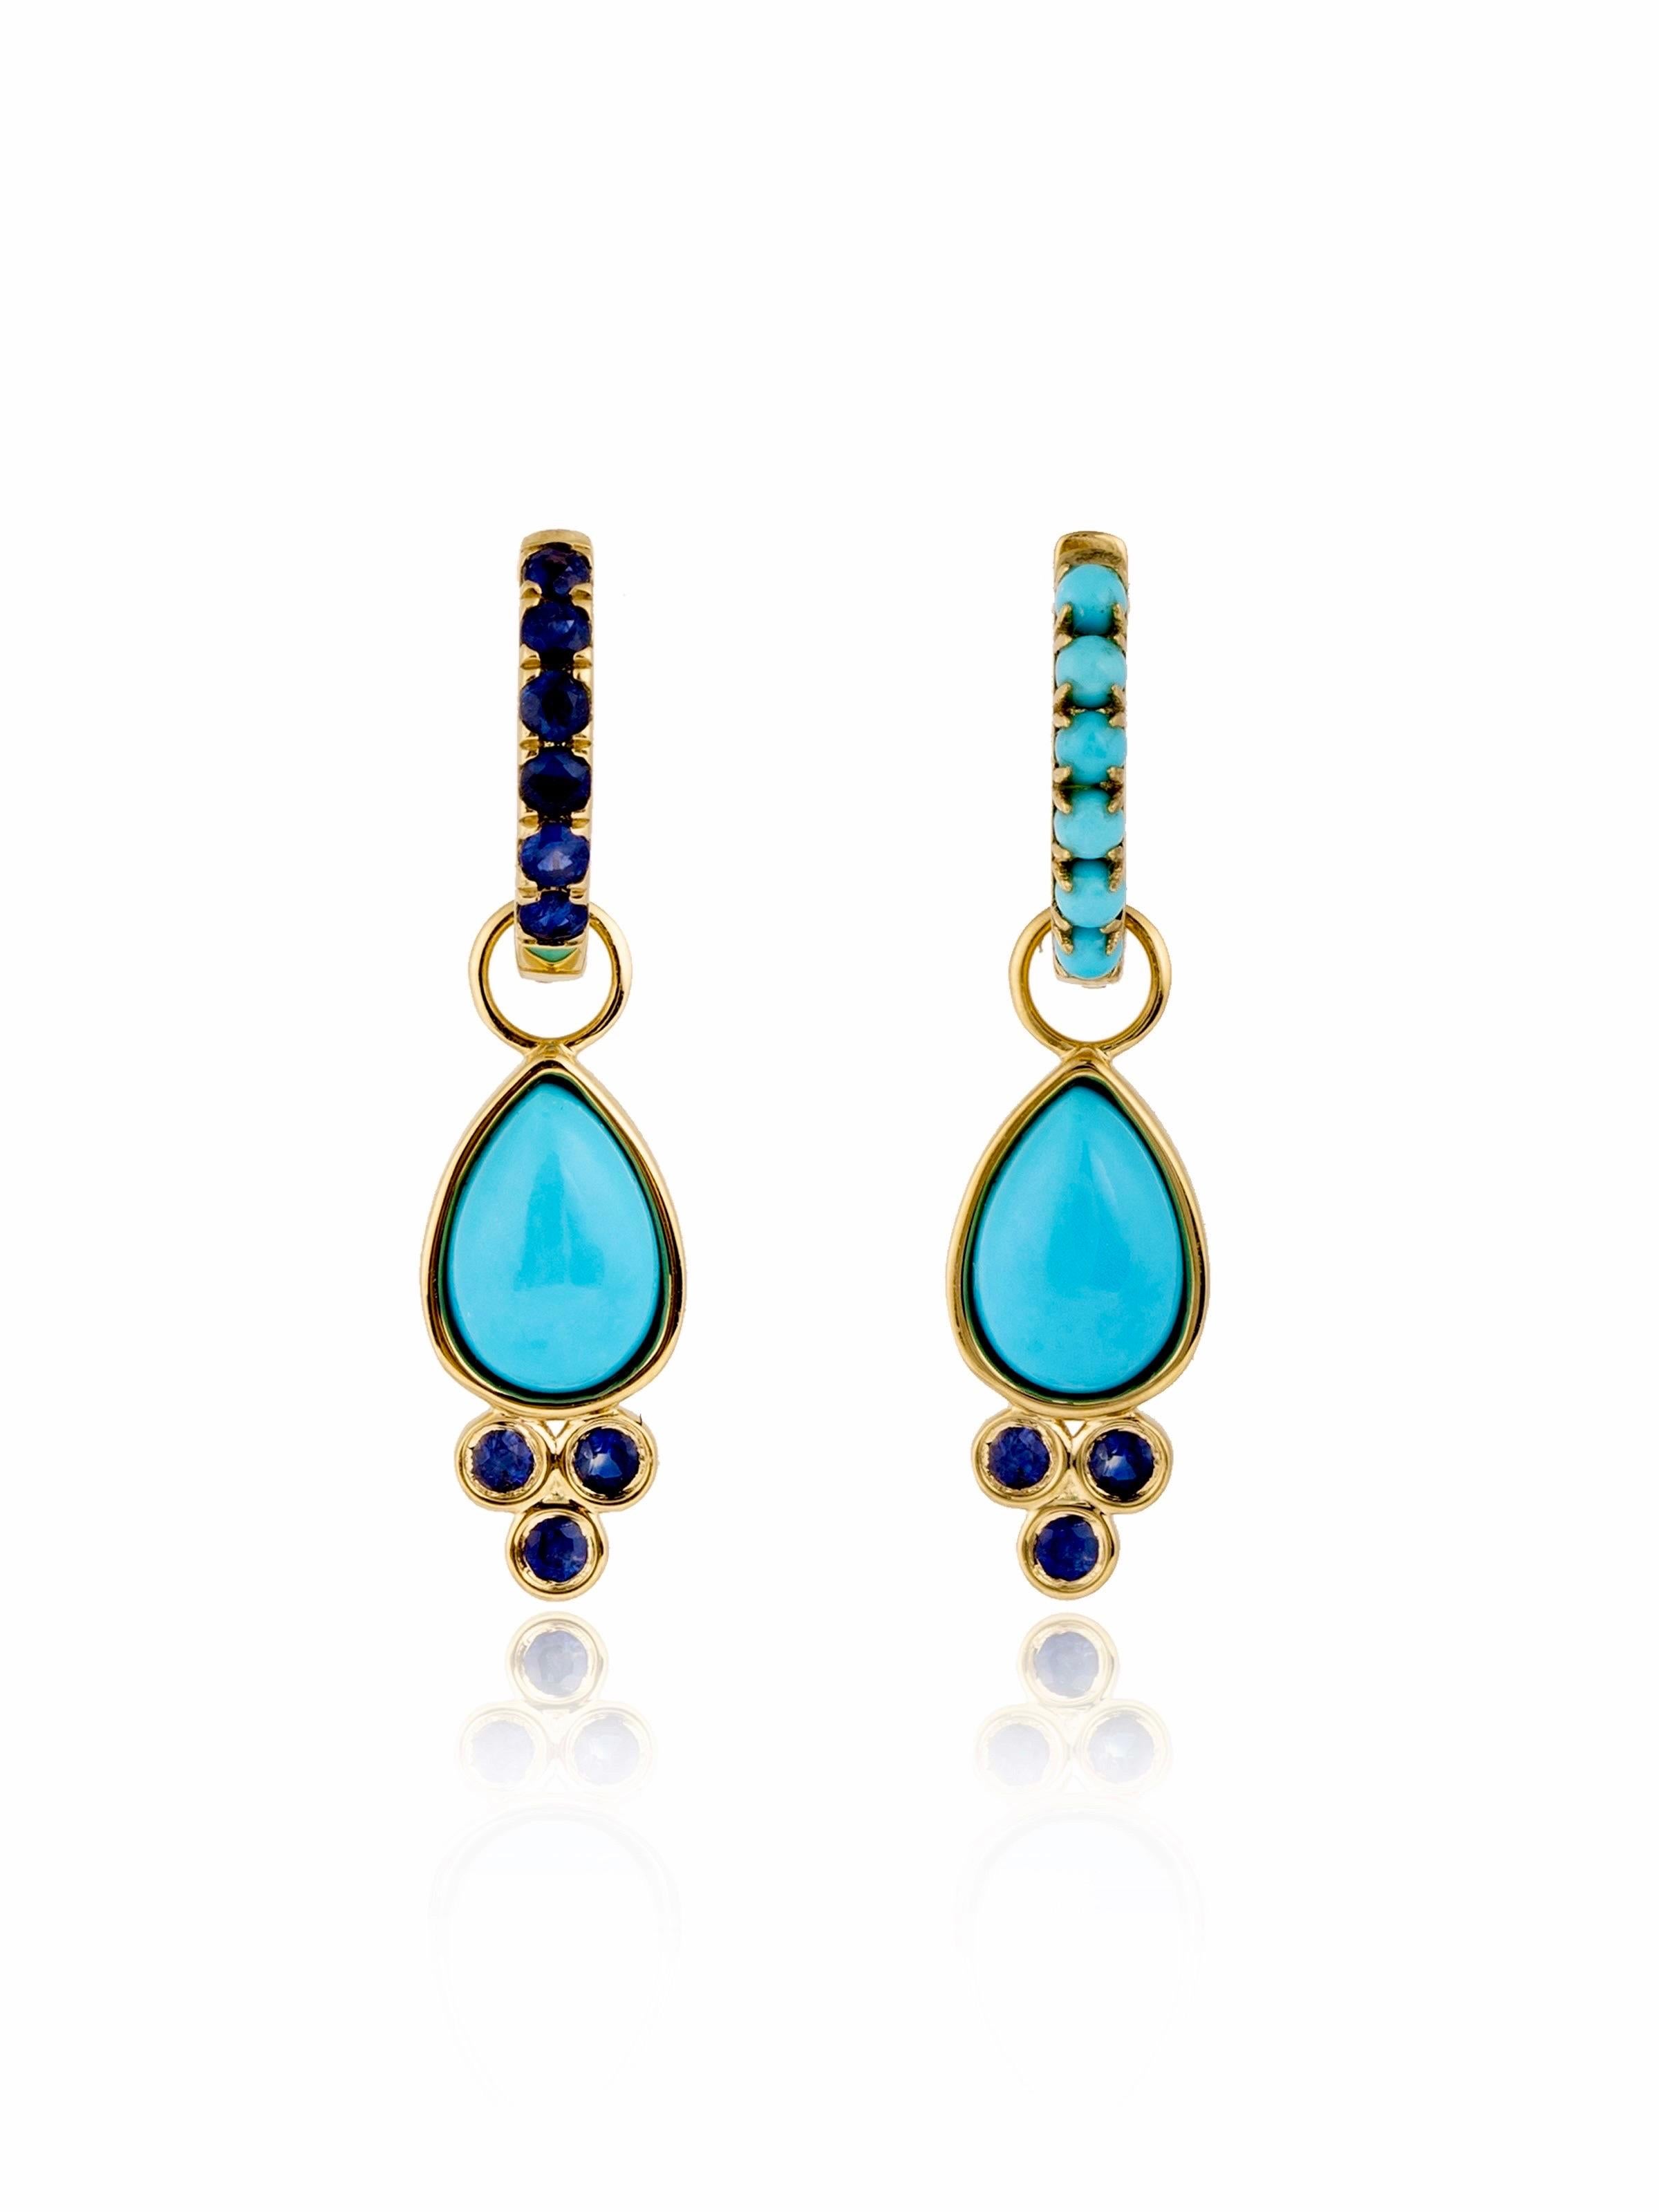 Nina Zhou Sapphire and Turquoise Double-sided Hoop Earrings with Drop Enhancers